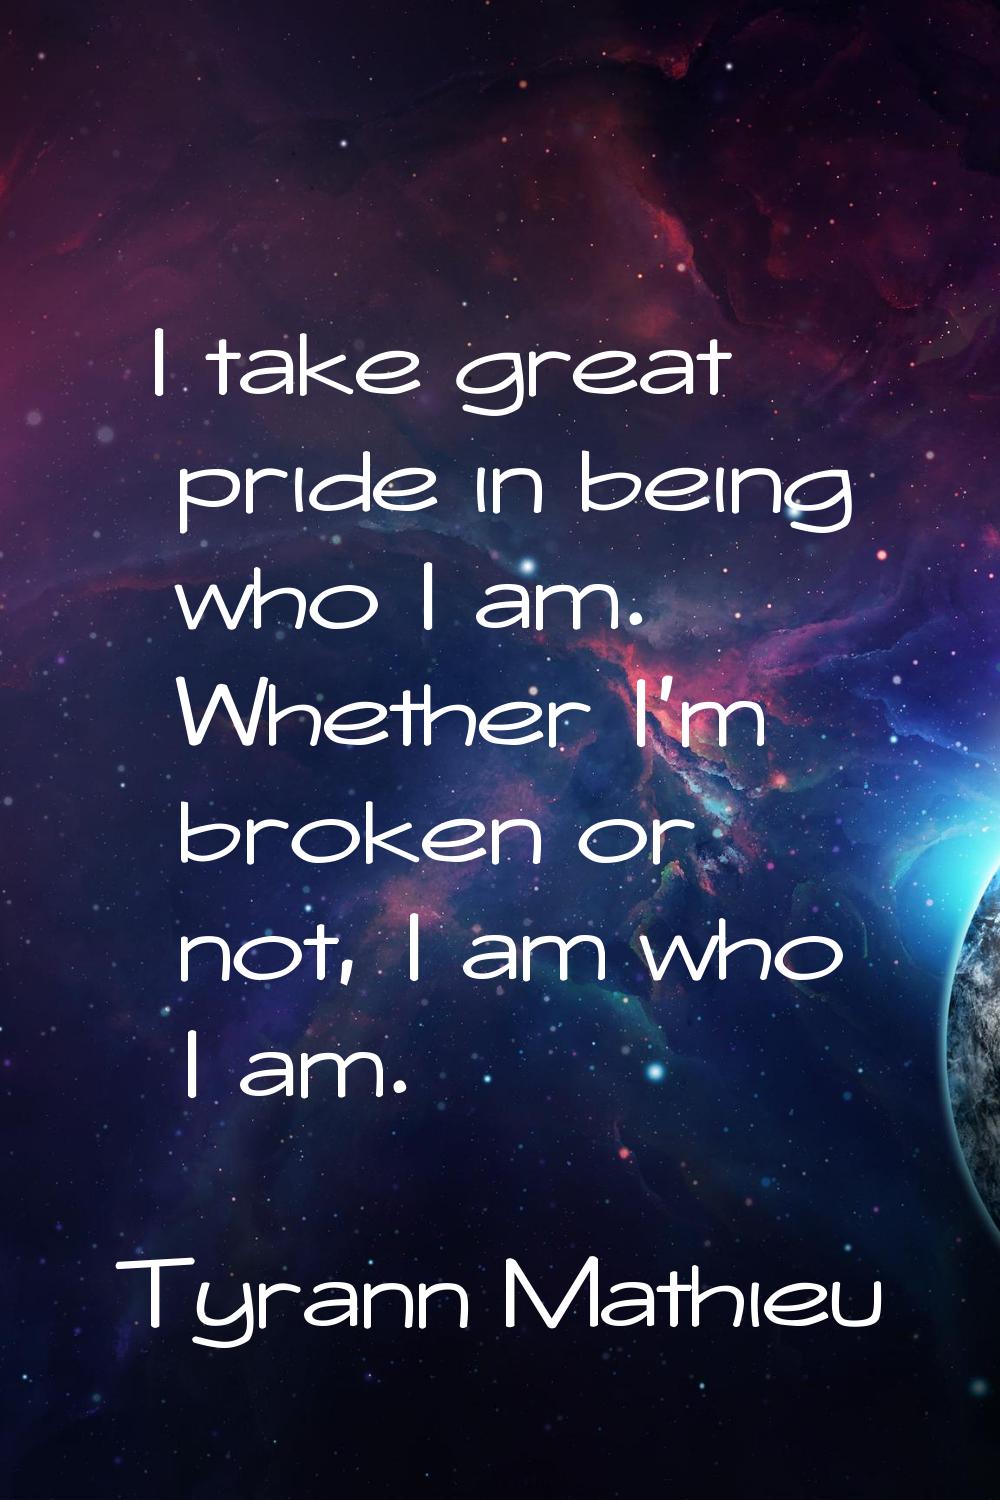 I take great pride in being who I am. Whether I'm broken or not, I am who I am.